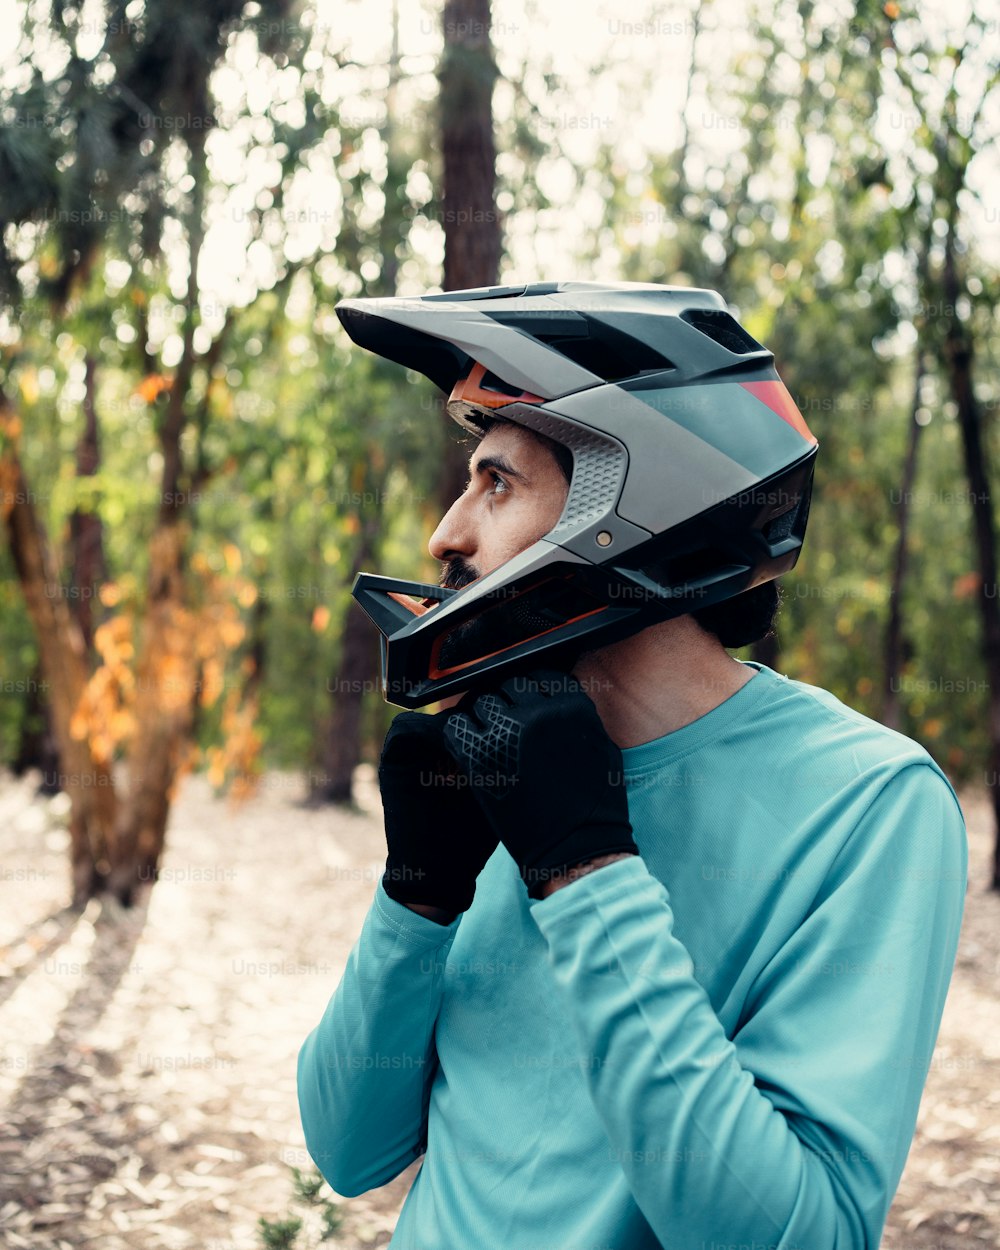 a man wearing a helmet while talking on a cell phone